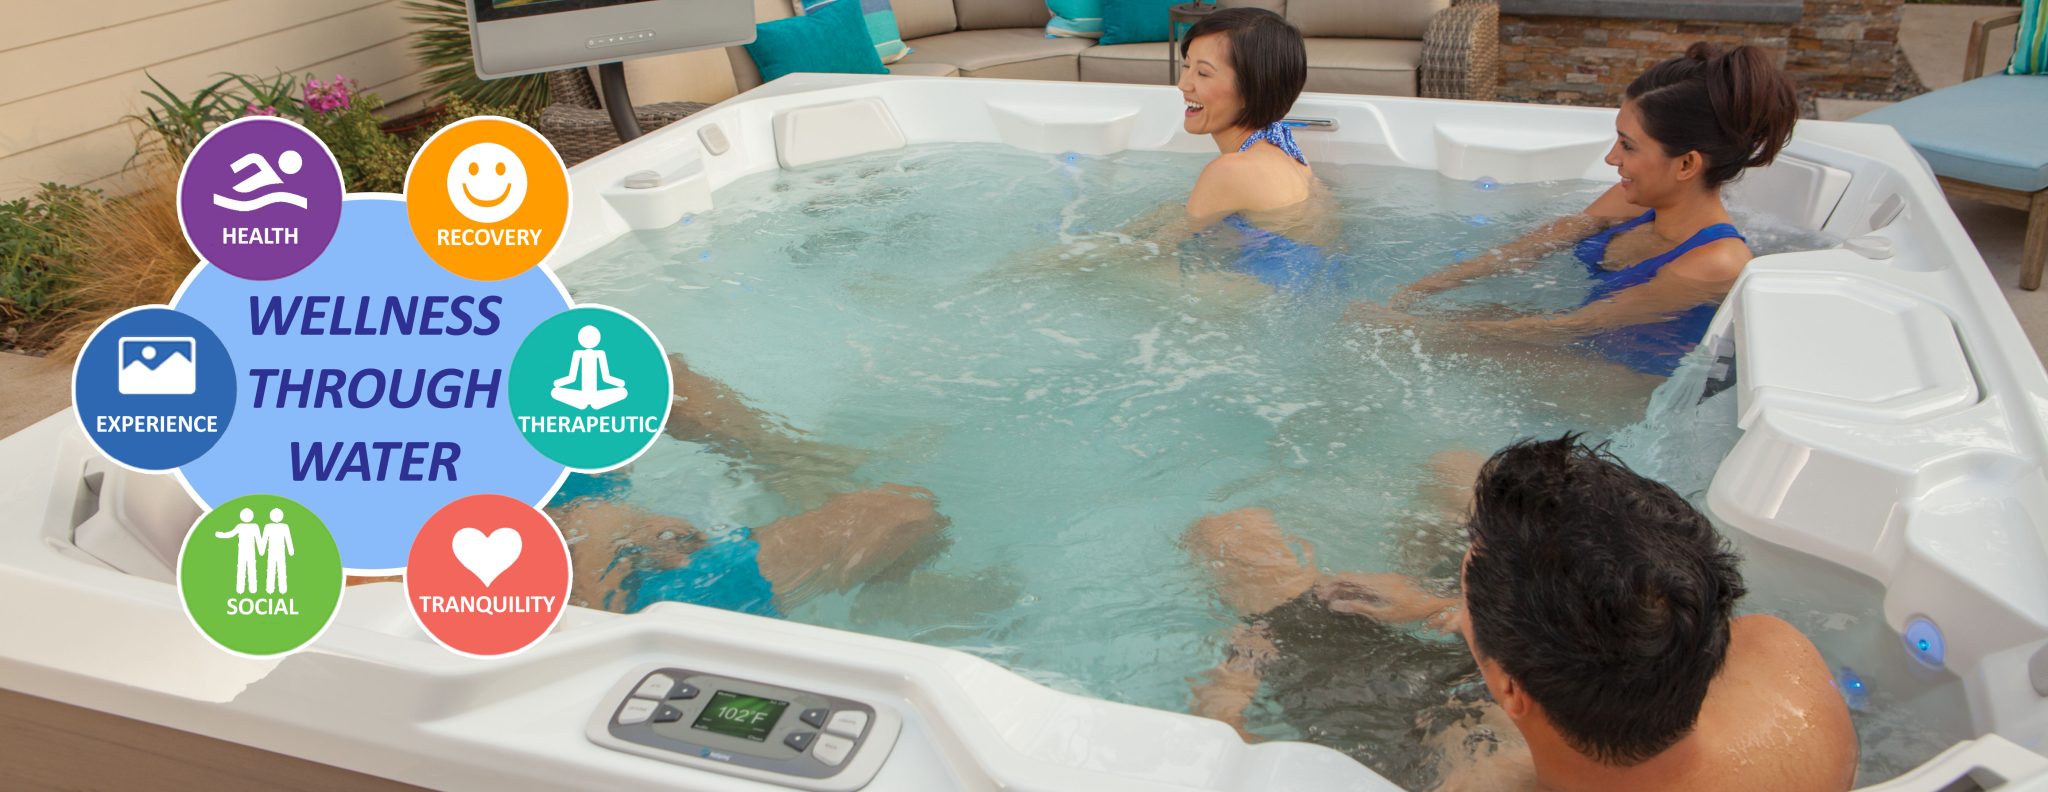 8 Ways a Hot Tub can improve your life. “Wellness Through Water”